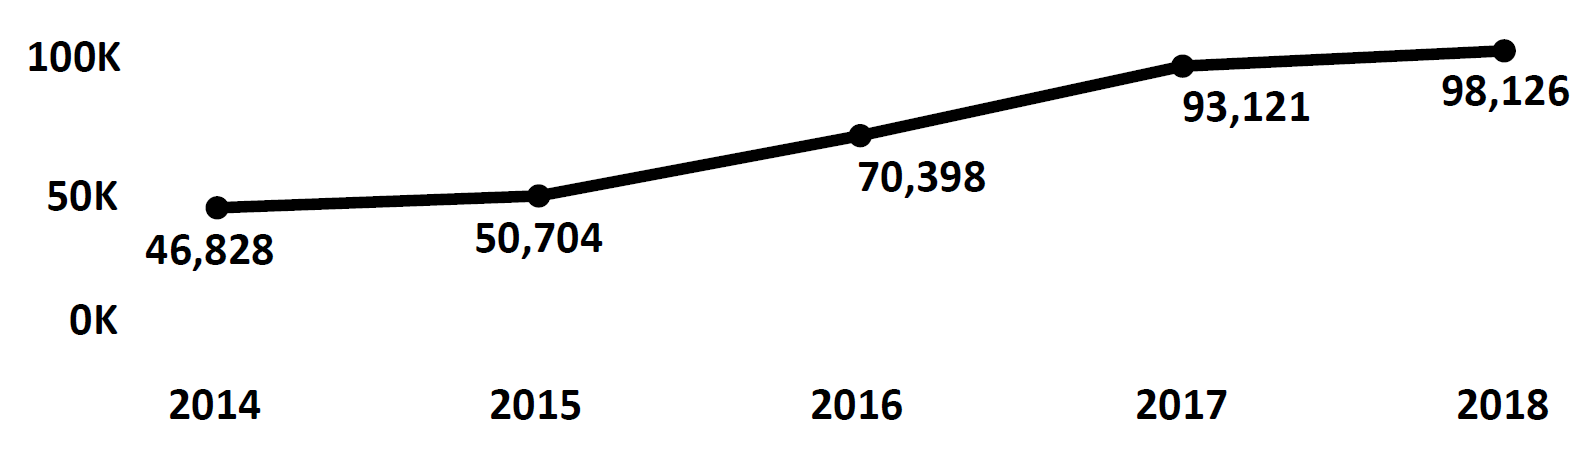 Graph of Do Not Call complaints recorded in Oregon from fiscal year 2014 to fiscal year 2018. In 2014 there were 46,828 complaints filed, which increased each year peaking at 98,126 in 2018.